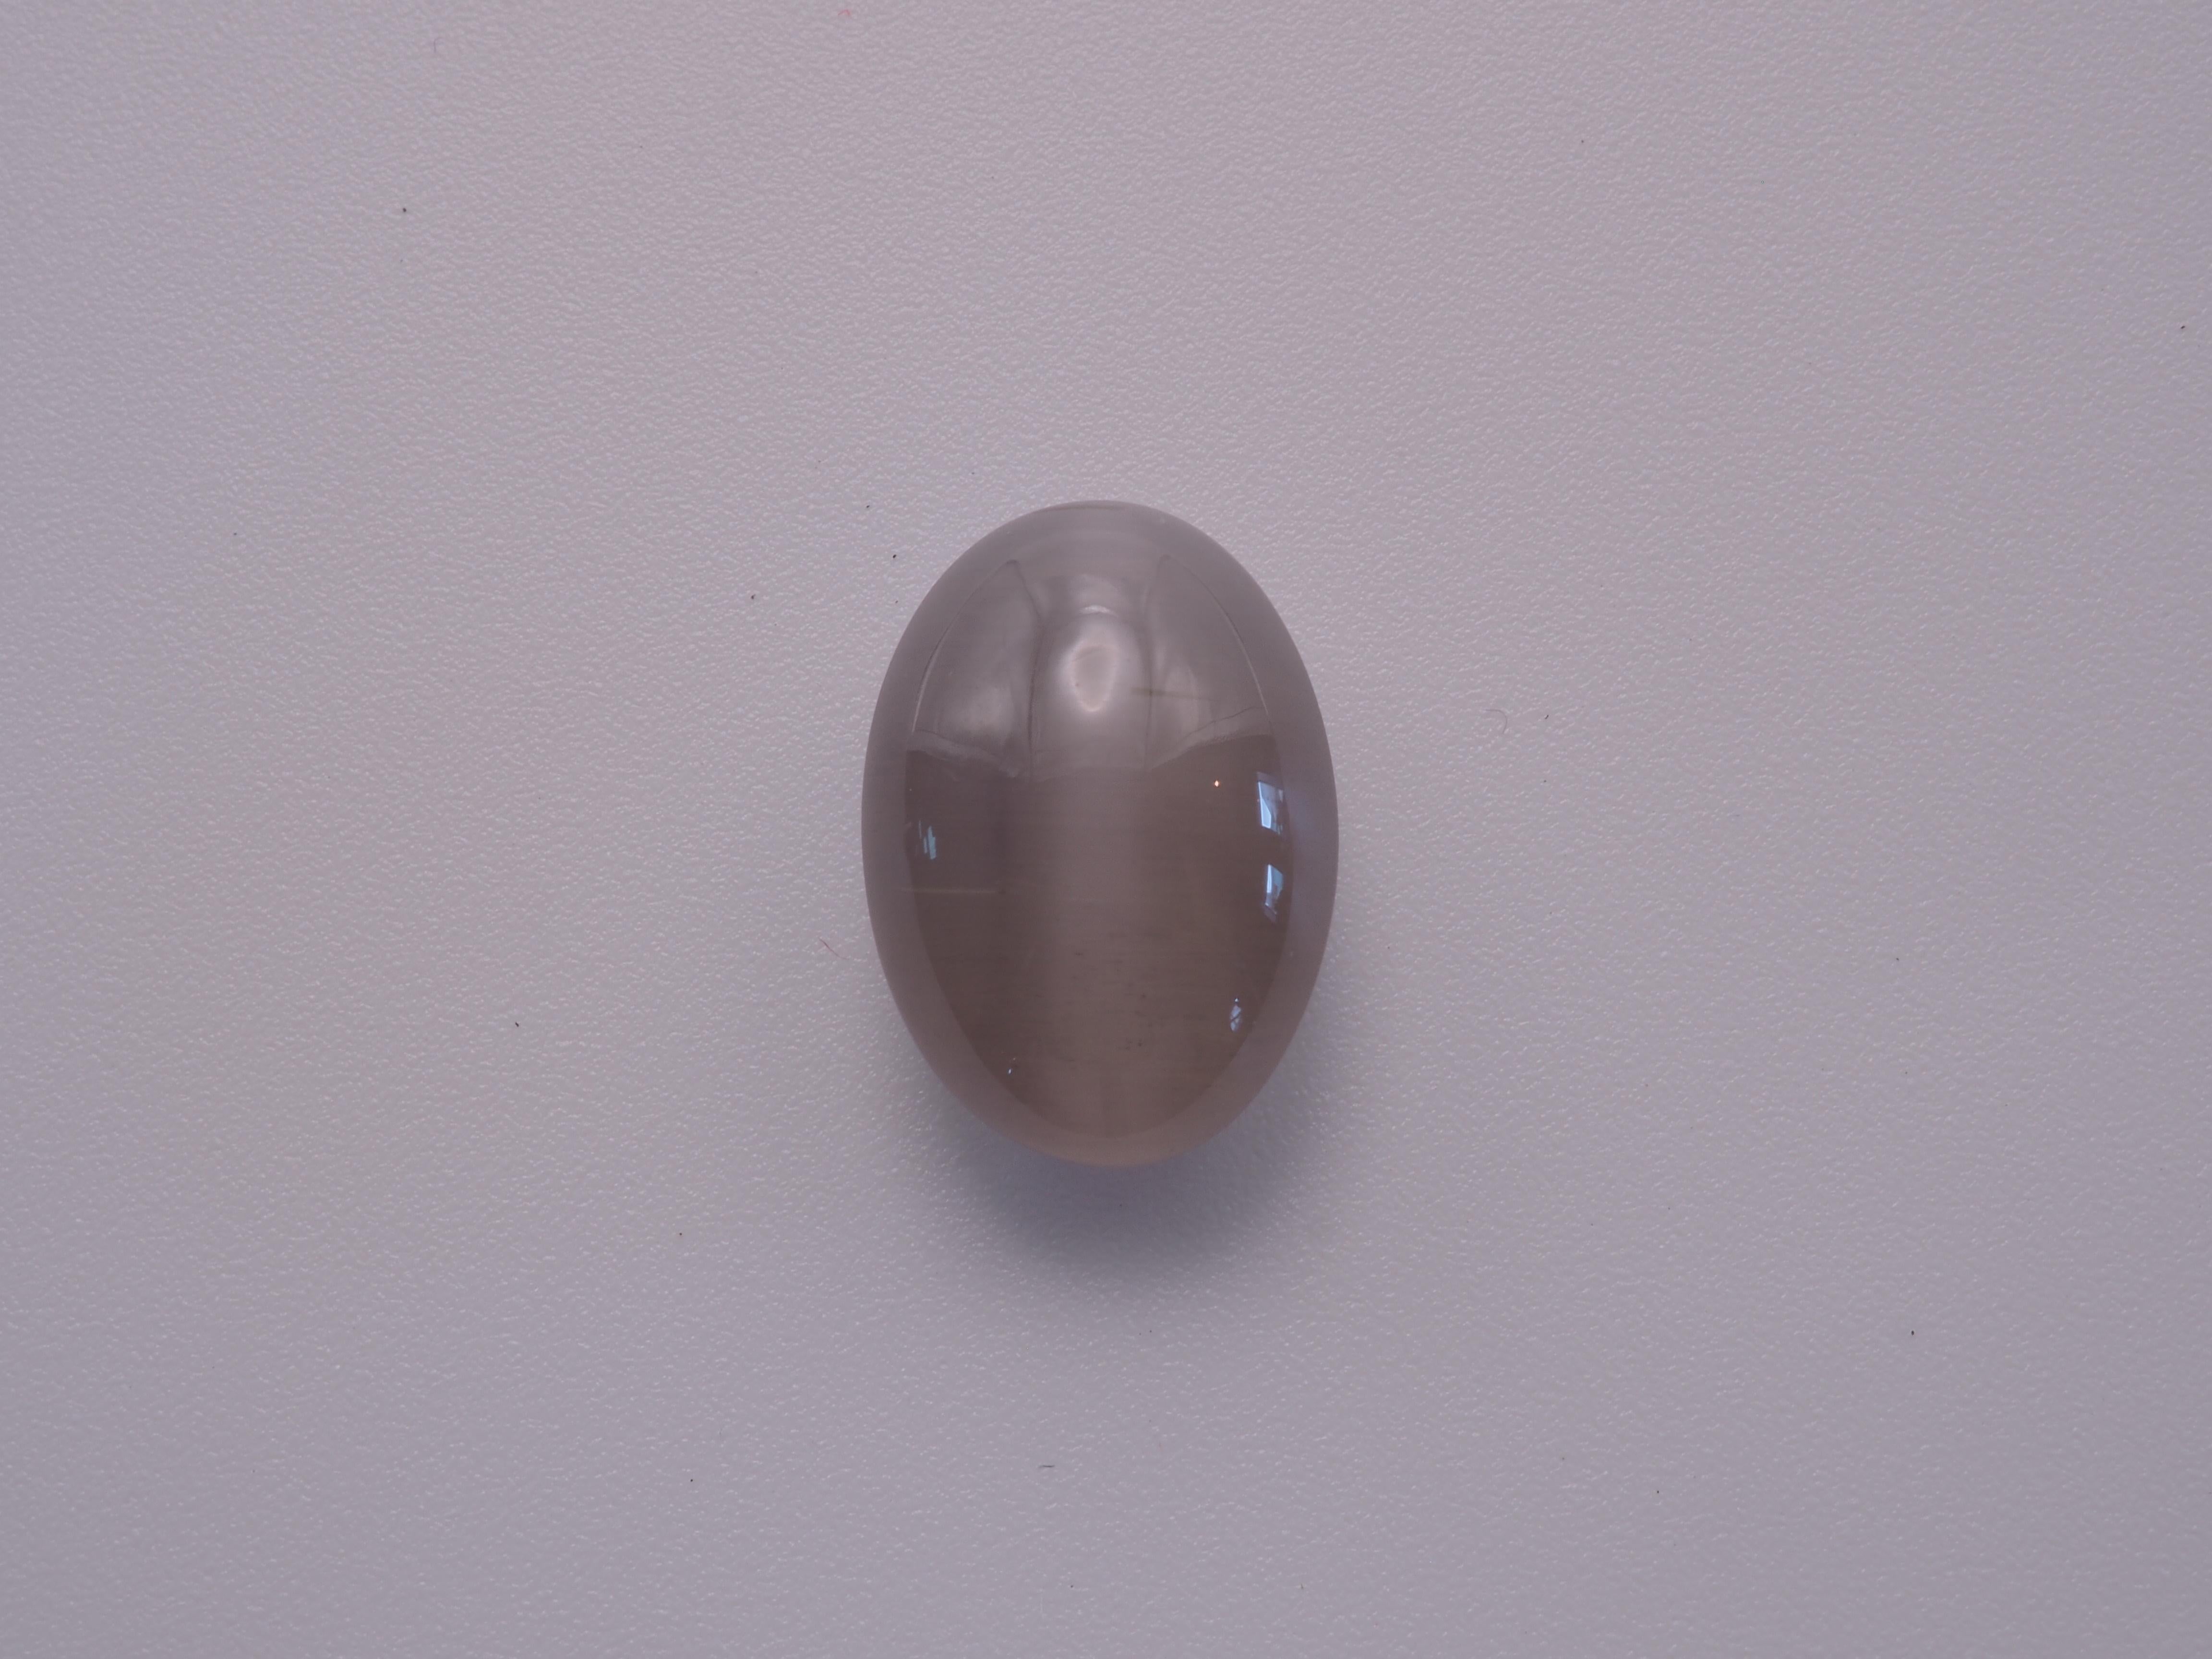 Cats eye fans please do not miss:
Sillimanite cat's eye is a legitimate beautiful gemstone with distinct appearances and allure of its own. The cat's eye on this gemstone very strongly saturated comparable to other species of cat's eye. 

This